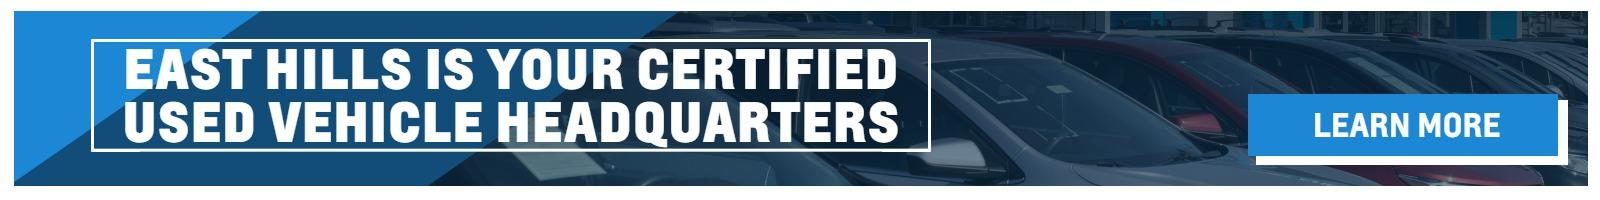 East Hills is your Certified Used Vehicle Headquarters | Banner